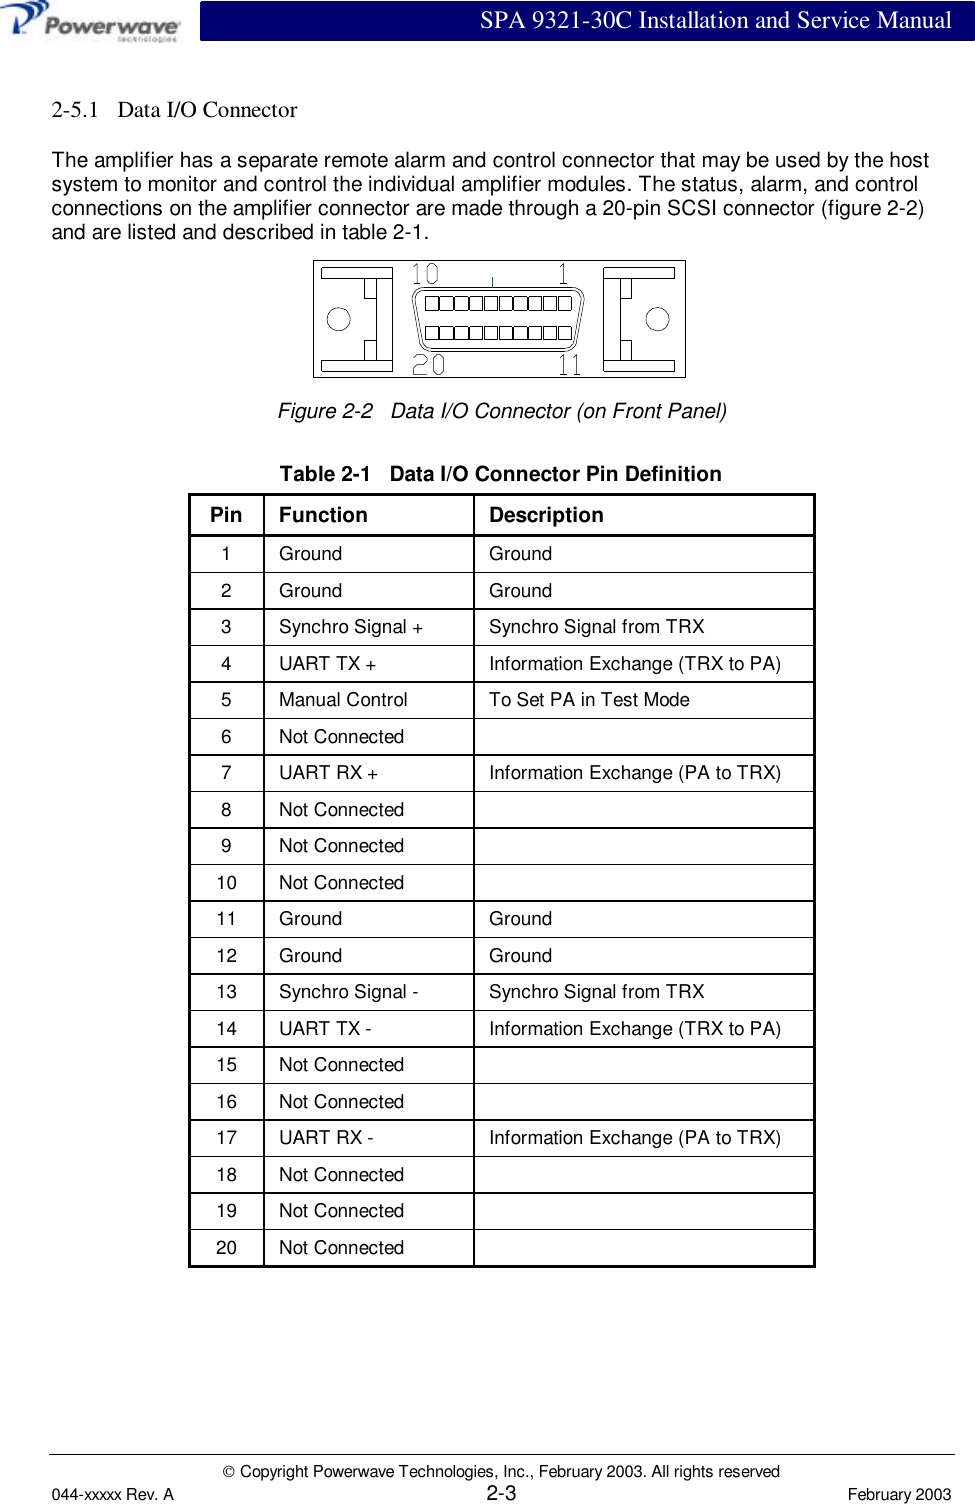 SPA 9321-30C Installation and Service Manual Copyright Powerwave Technologies, Inc., February 2003. All rights reserved044-xxxxx Rev. A2-3February 20032-5.1   Data I/O ConnectorThe amplifier has a separate remote alarm and control connector that may be used by the hostsystem to monitor and control the individual amplifier modules. The status, alarm, and controlconnections on the amplifier connector are made through a 20-pin SCSI connector (figure 2-2)and are listed and described in table 2-1.Figure 2-2   Data I/O Connector (on Front Panel)Table 2-1   Data I/O Connector Pin DefinitionPin Function Description1Ground Ground2Ground Ground3Synchro Signal + Synchro Signal from TRX4UART TX + Information Exchange (TRX to PA)5Manual Control To Set PA in Test Mode6Not Connected7UART RX + Information Exchange (PA to TRX)8Not Connected9Not Connected10 Not Connected11 Ground Ground12 Ground Ground13 Synchro Signal - Synchro Signal from TRX14 UART TX - Information Exchange (TRX to PA)15 Not Connected16 Not Connected17 UART RX - Information Exchange (PA to TRX)18 Not Connected19 Not Connected20 Not Connected